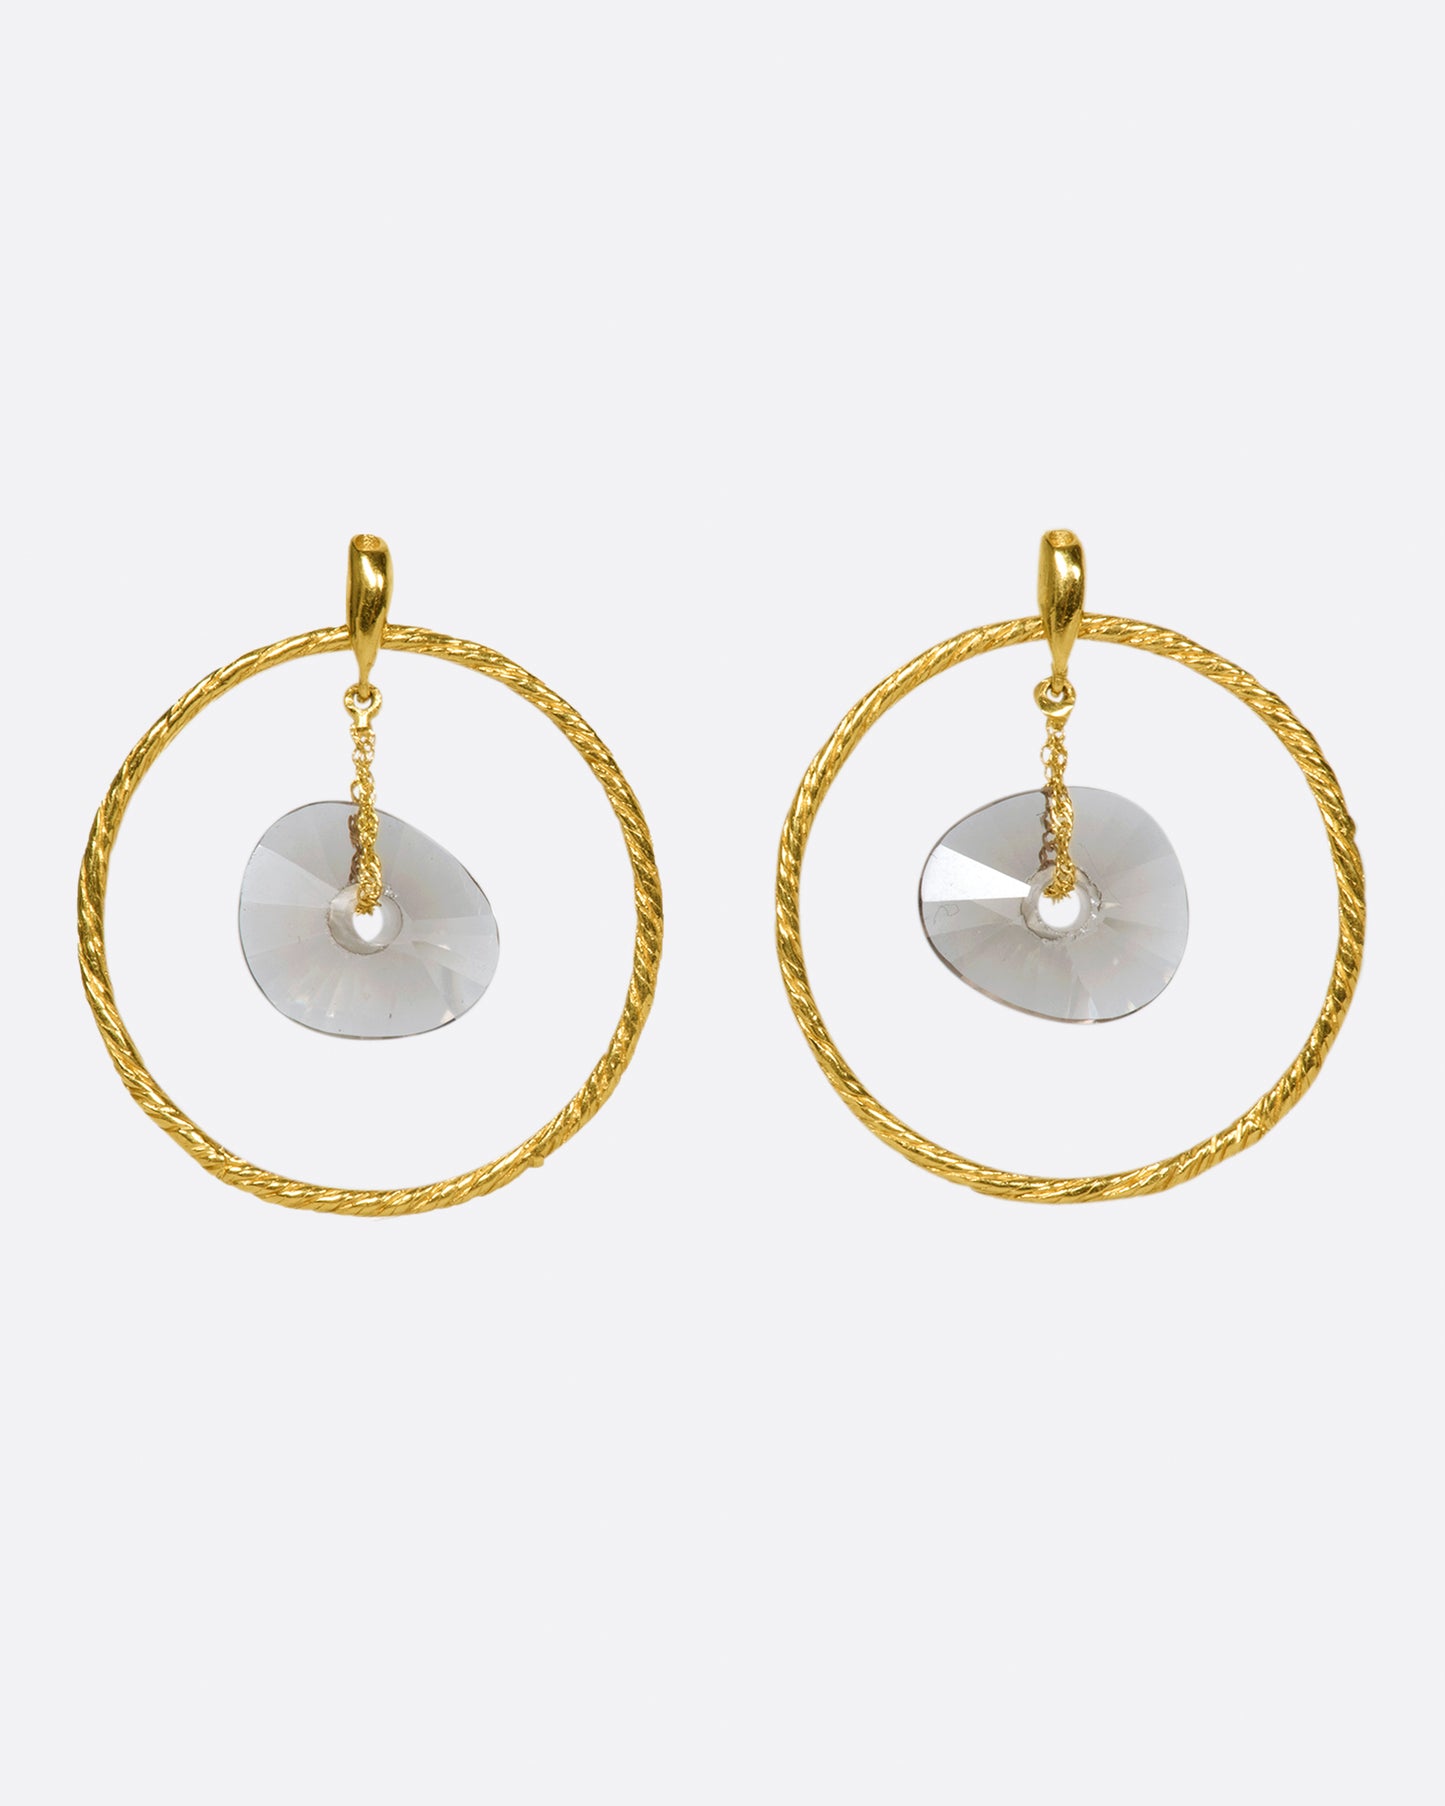 A pair of circular yellow gold wire earrings with smokey quartz donut-shaped beads hanging freely in the middle.